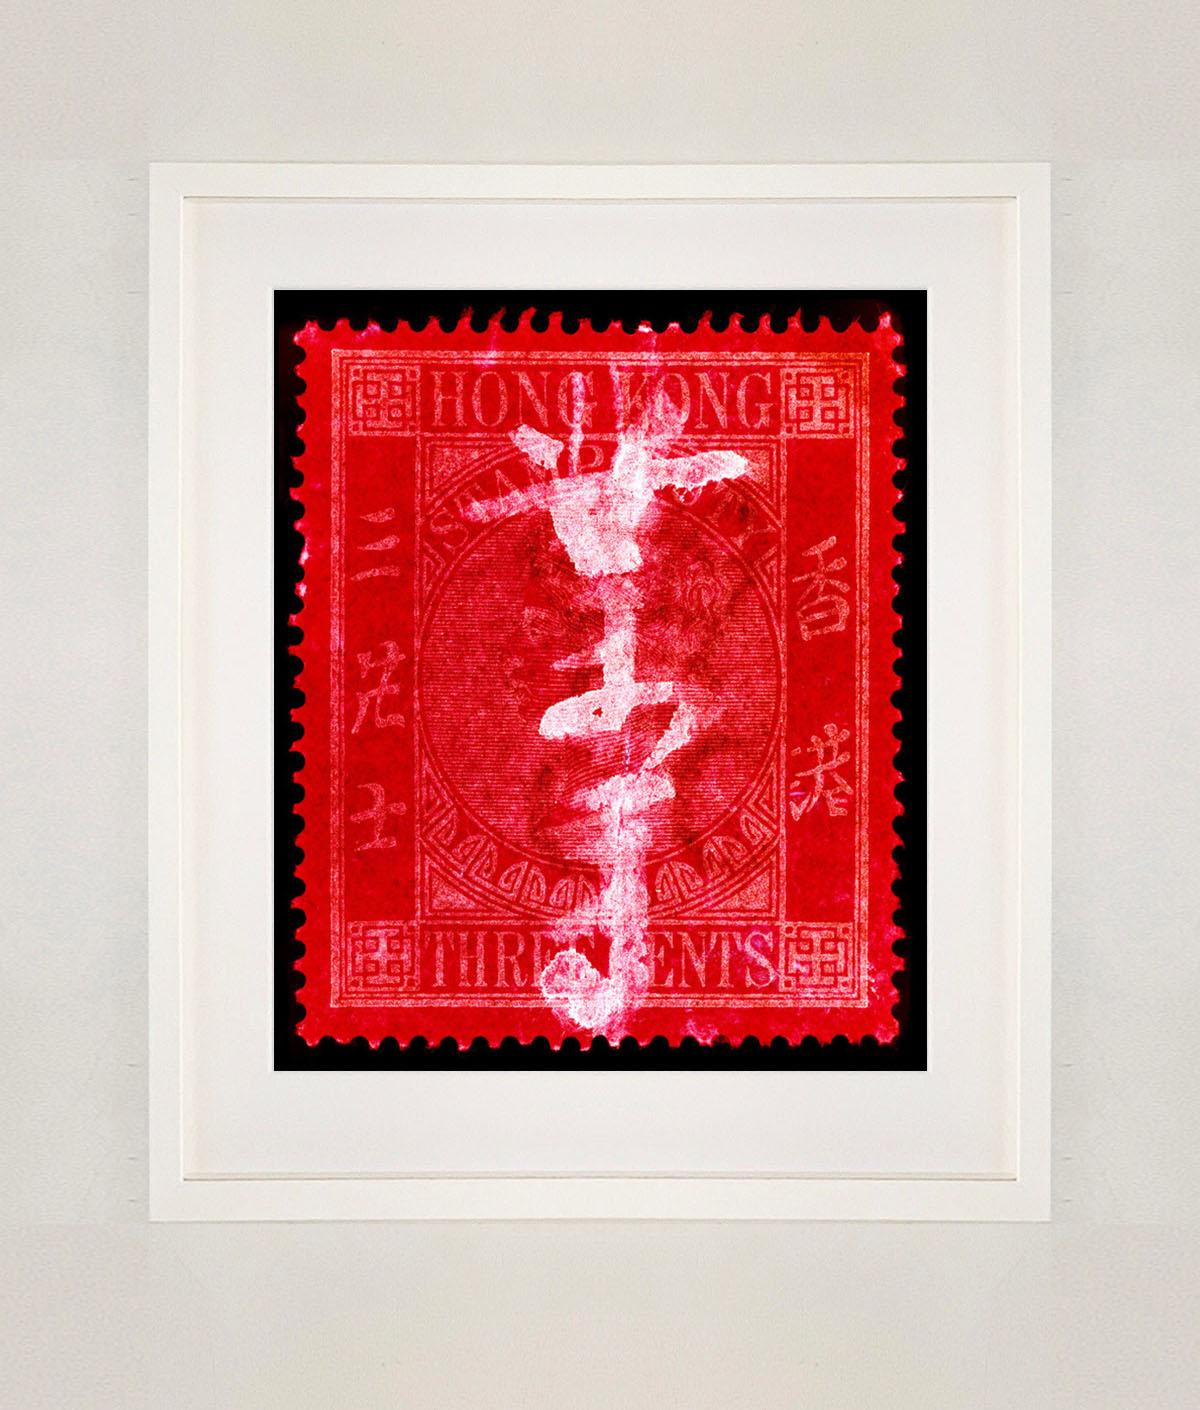 Stamp Collection, QV 3 cents - Conceptual color photography - Red Abstract Photograph by Heidler & Heeps